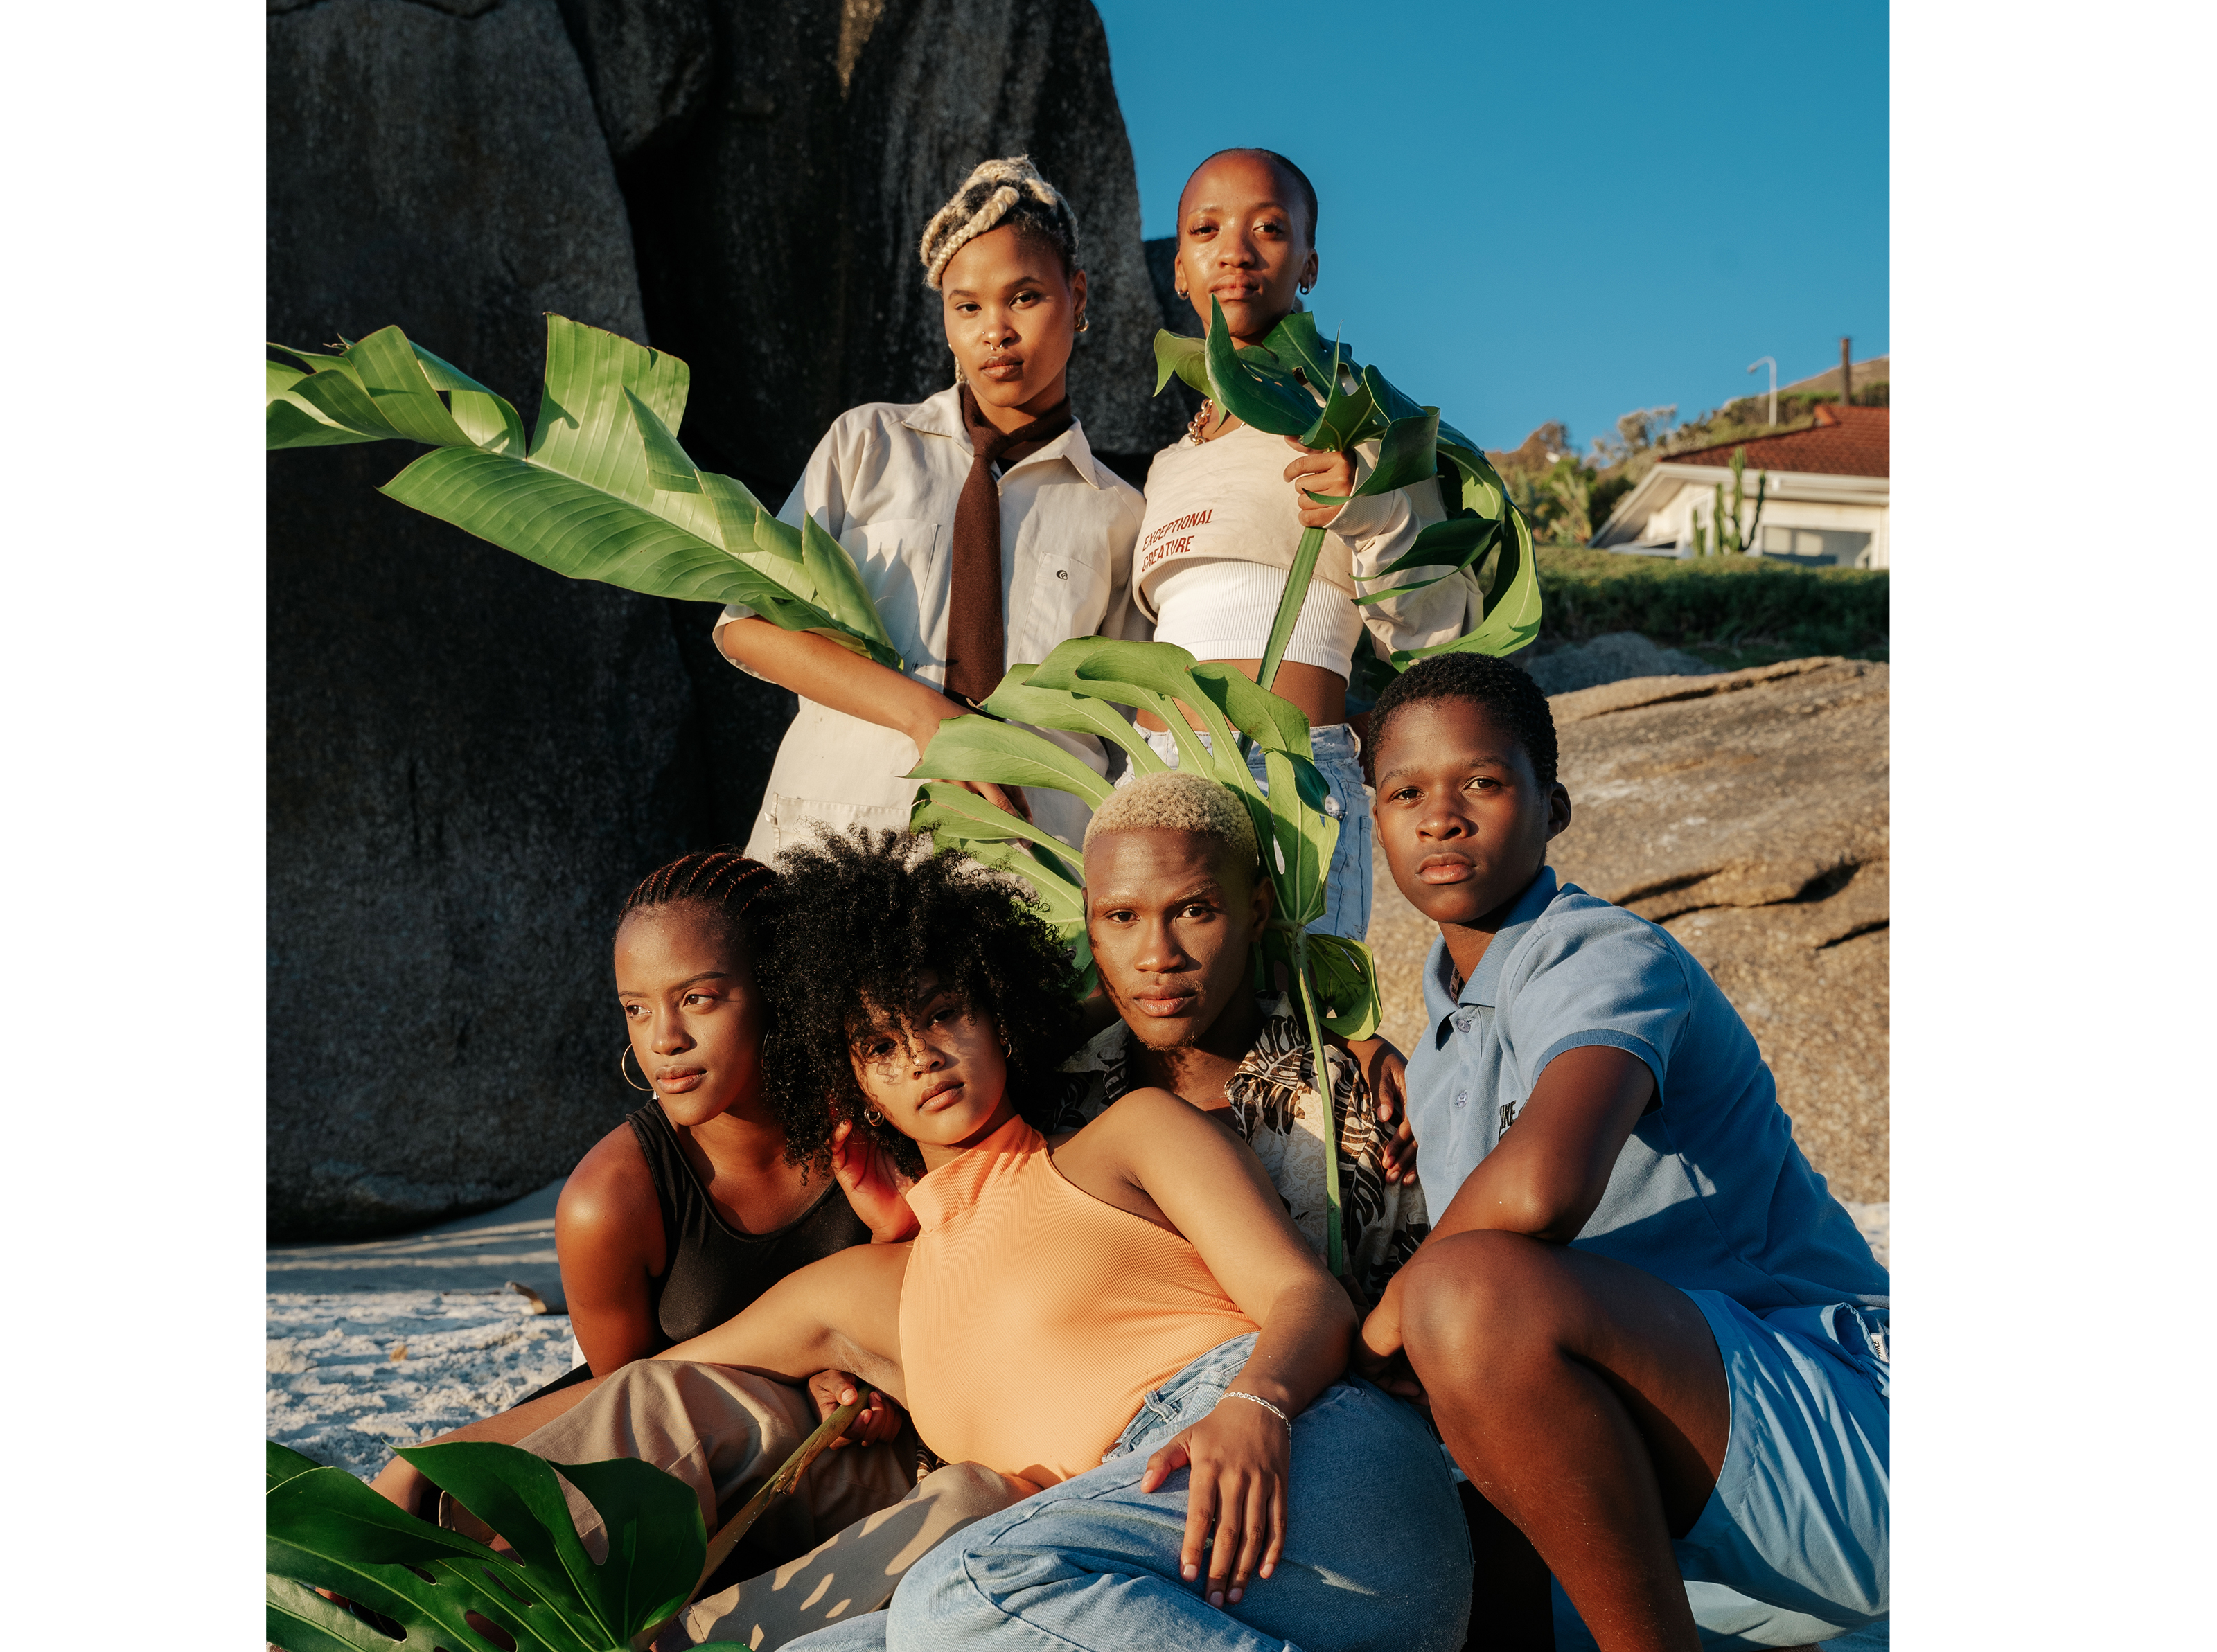 AFRIKA YOUNG: London to CapeTown’s Extraordinary Squad of Young Dance by Rocio Chacon [@ro.ci.cha]